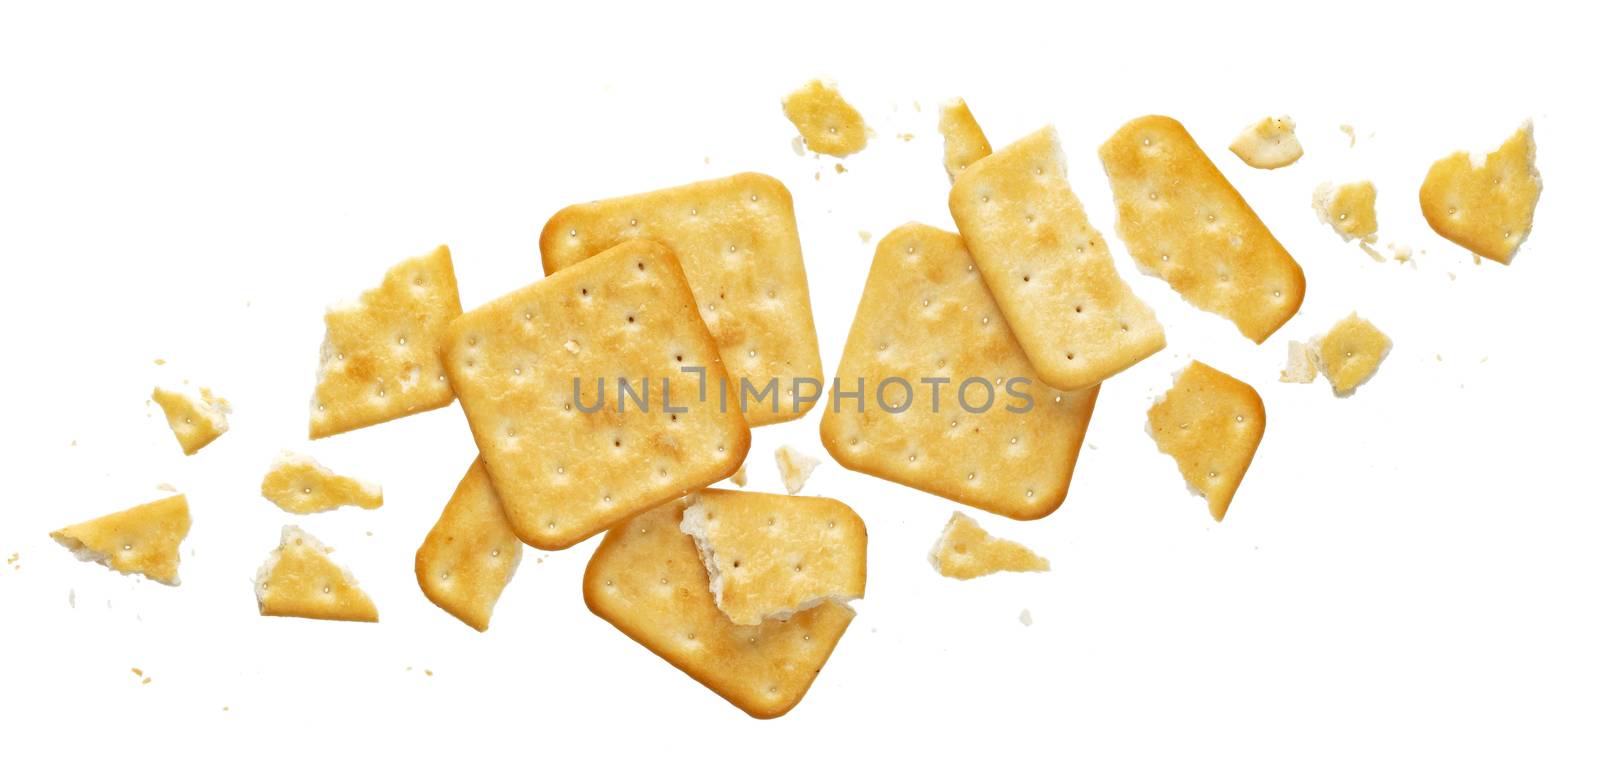 Broken cracker isolated on white background, top view by xamtiw